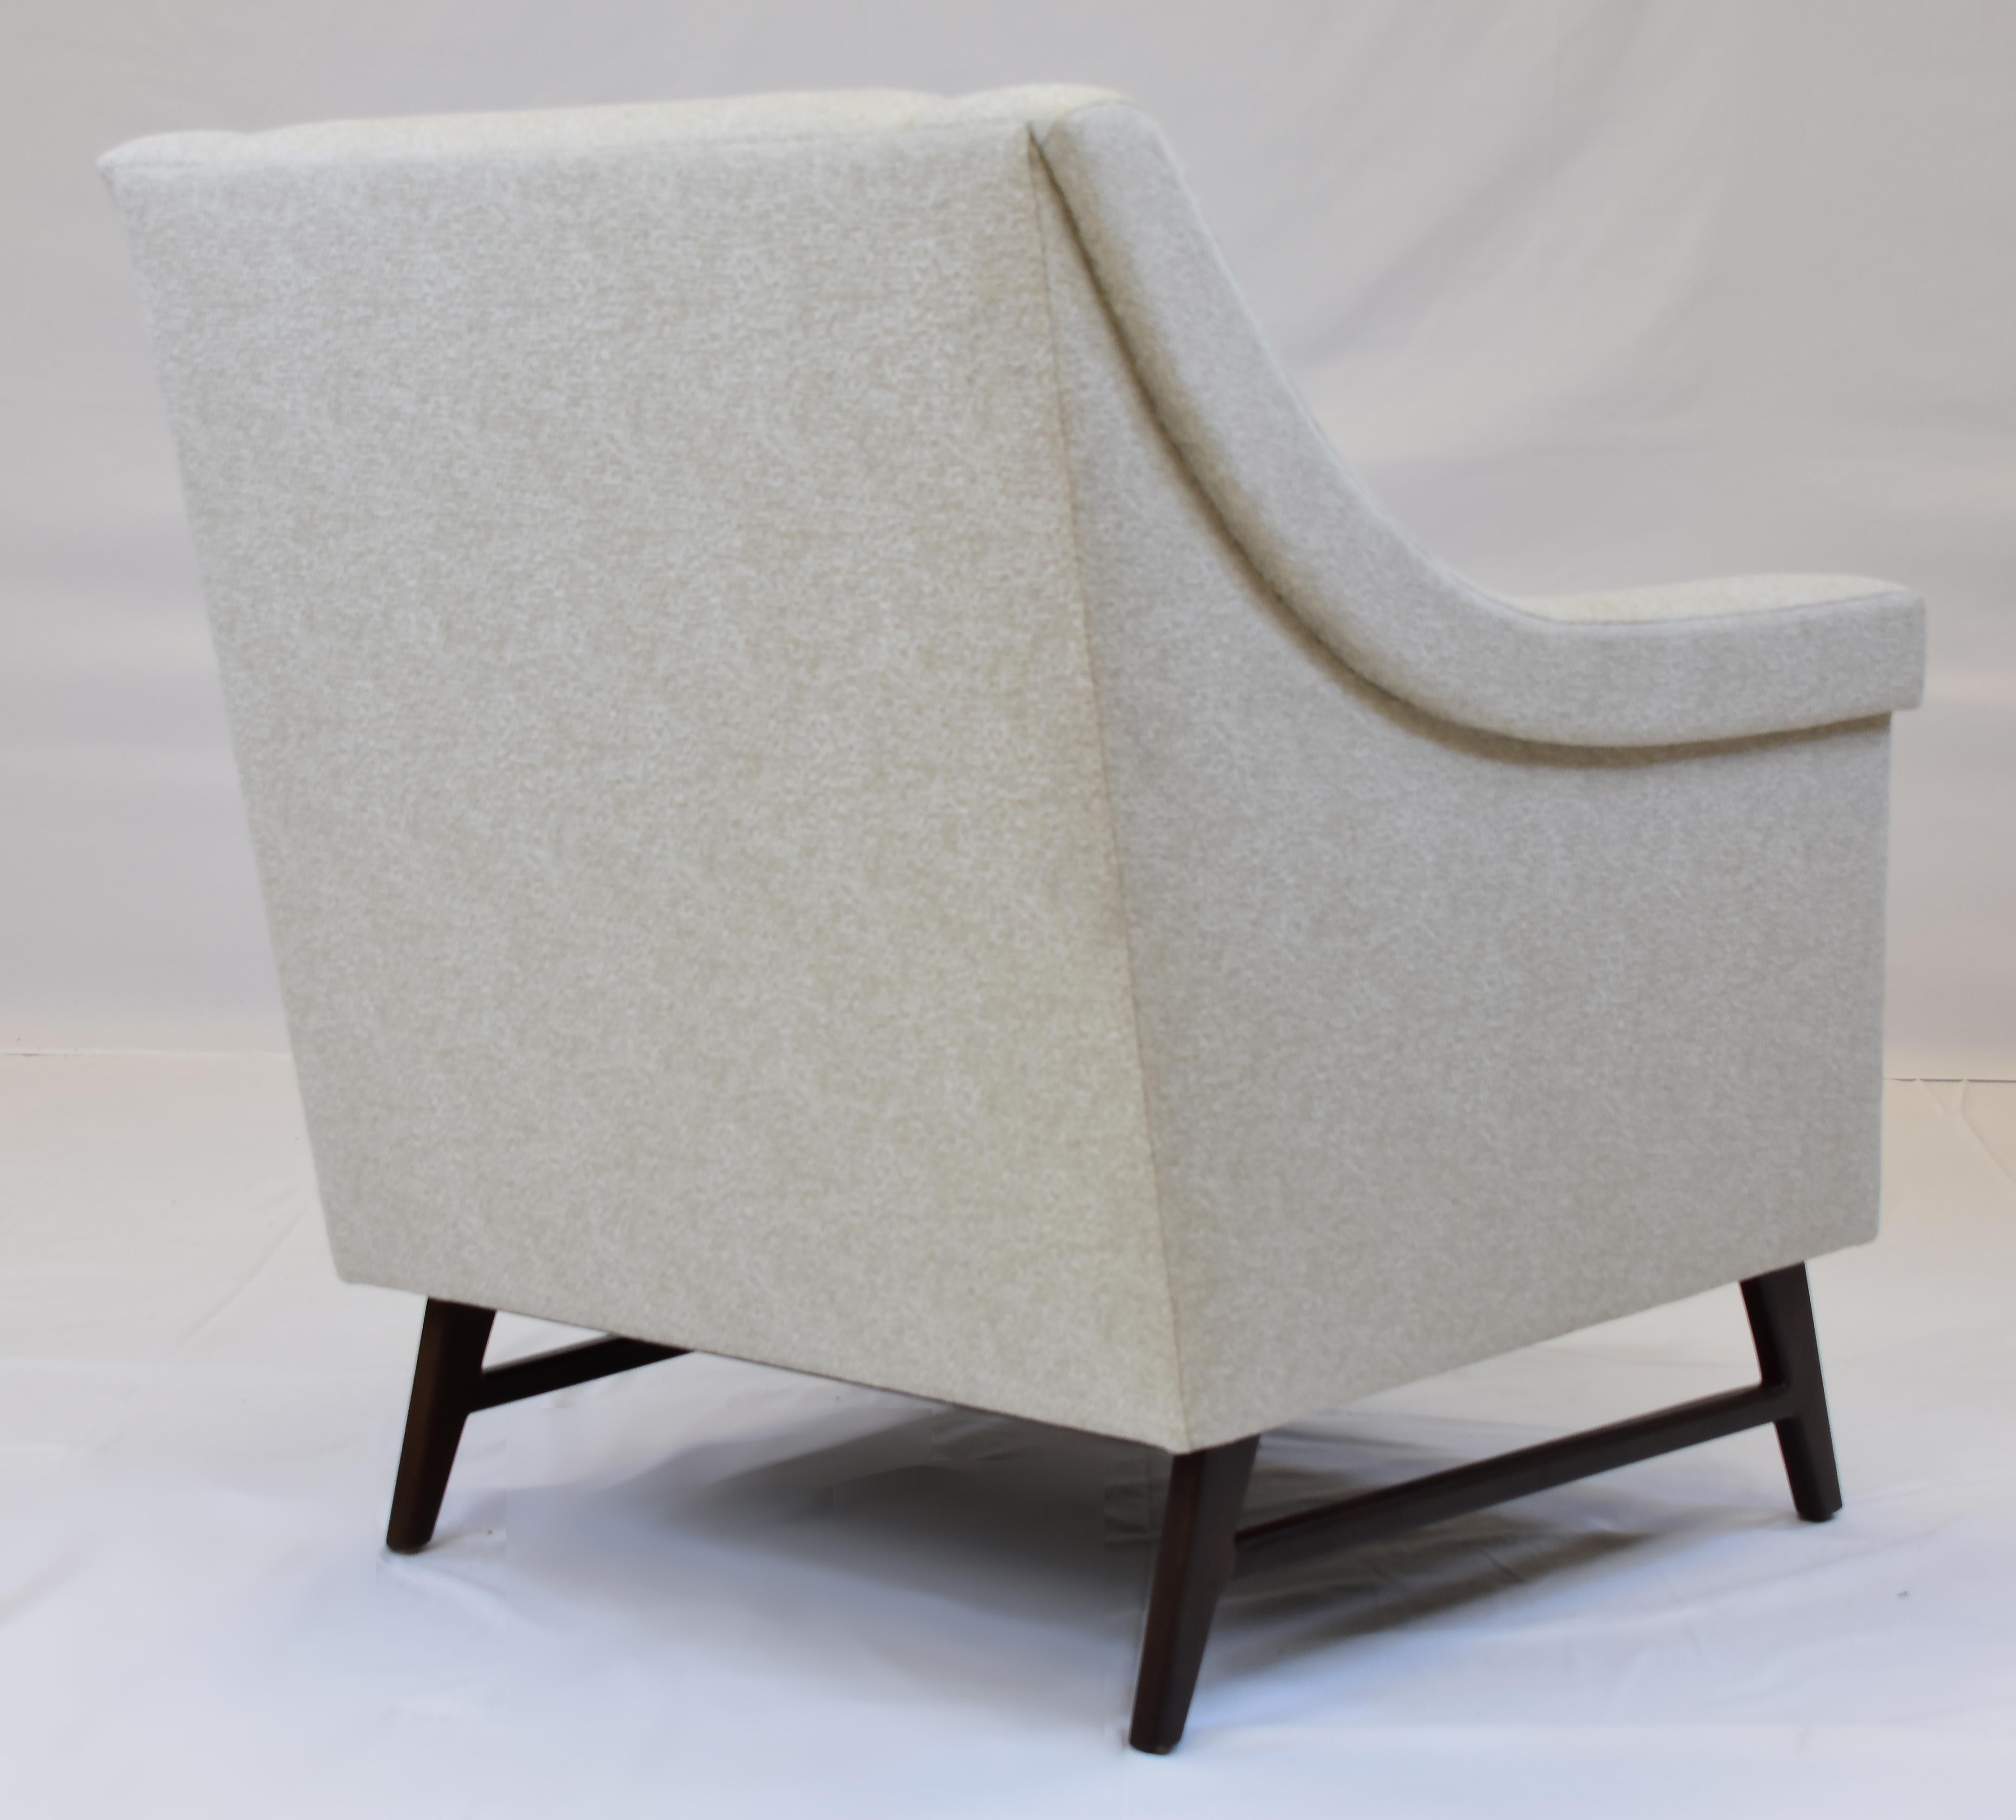 Contemporary Le Jeune Upholstery Hansen Lounge Chair Showroom Model